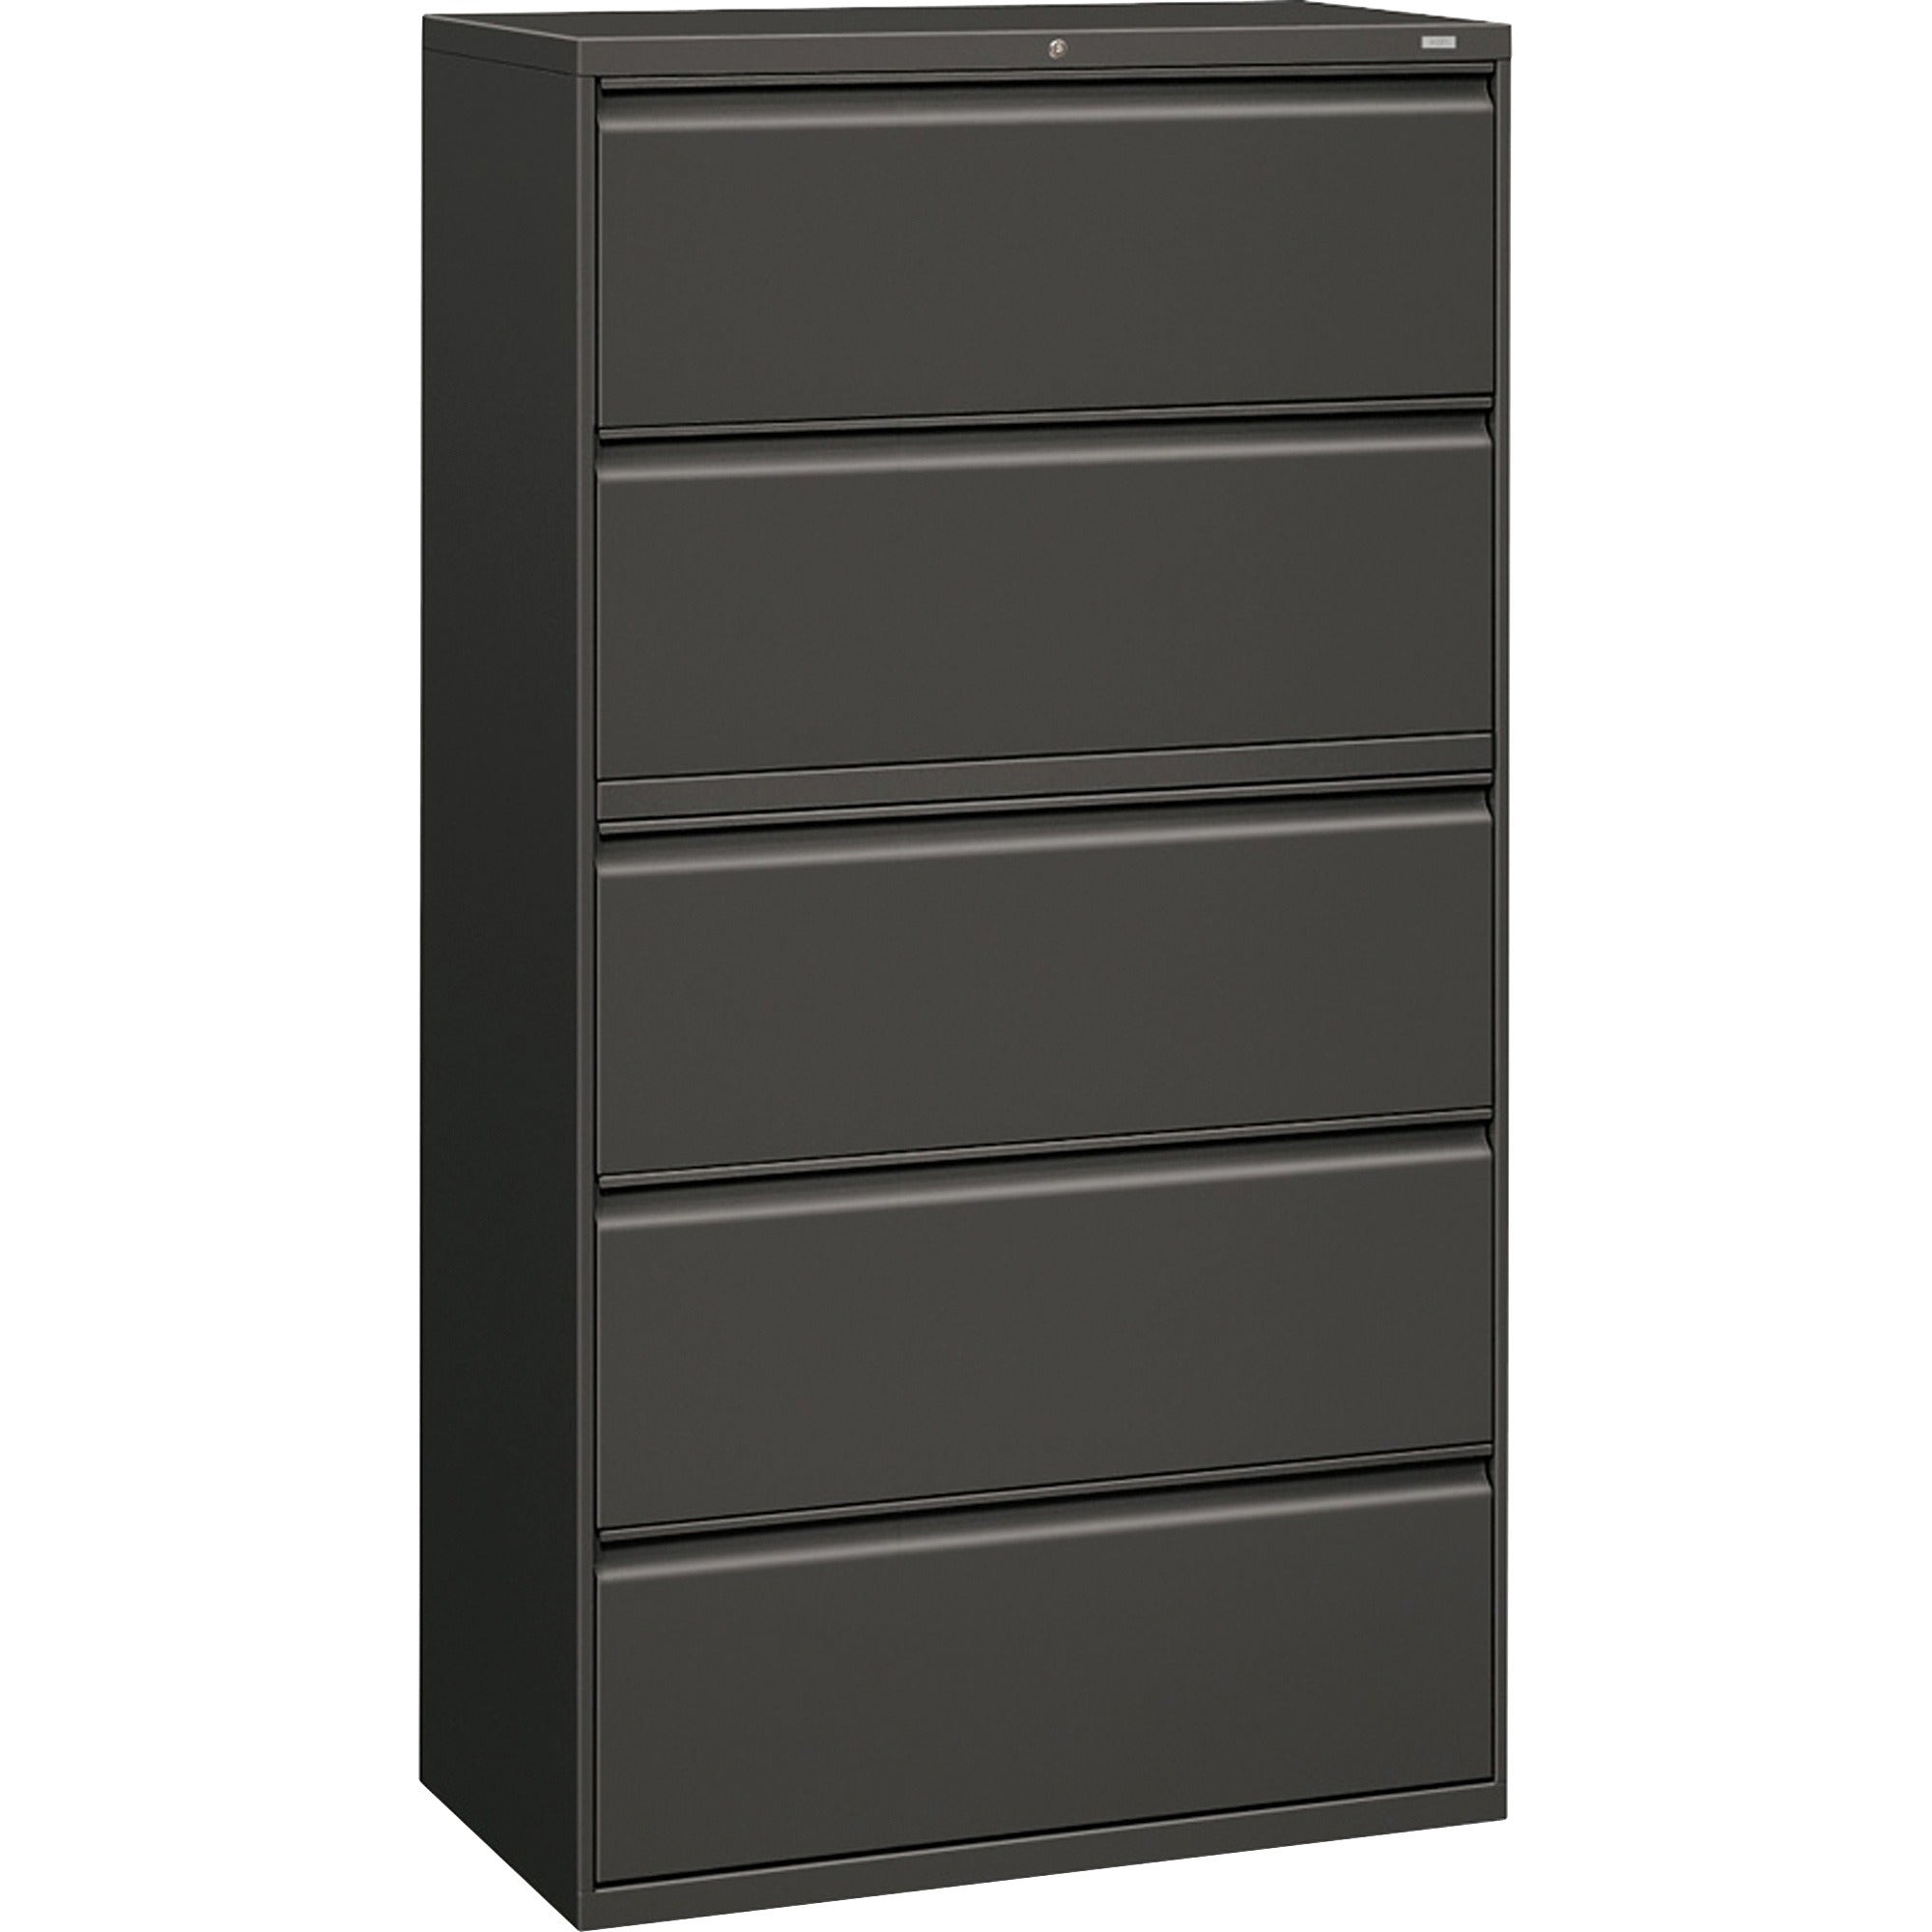 HON Brigade 800 Series 5-Drawer Lateral - 36" x 18" x 64.3" - 2 x Shelf(ves) - 5 x Drawer(s) for File - A4, Legal, Letter - Lateral - Interlocking, Durable, Leveling Glide, Recessed Handle, Ball-bearing Suspension - Charcoal - Baked Enamel - Steel - - 